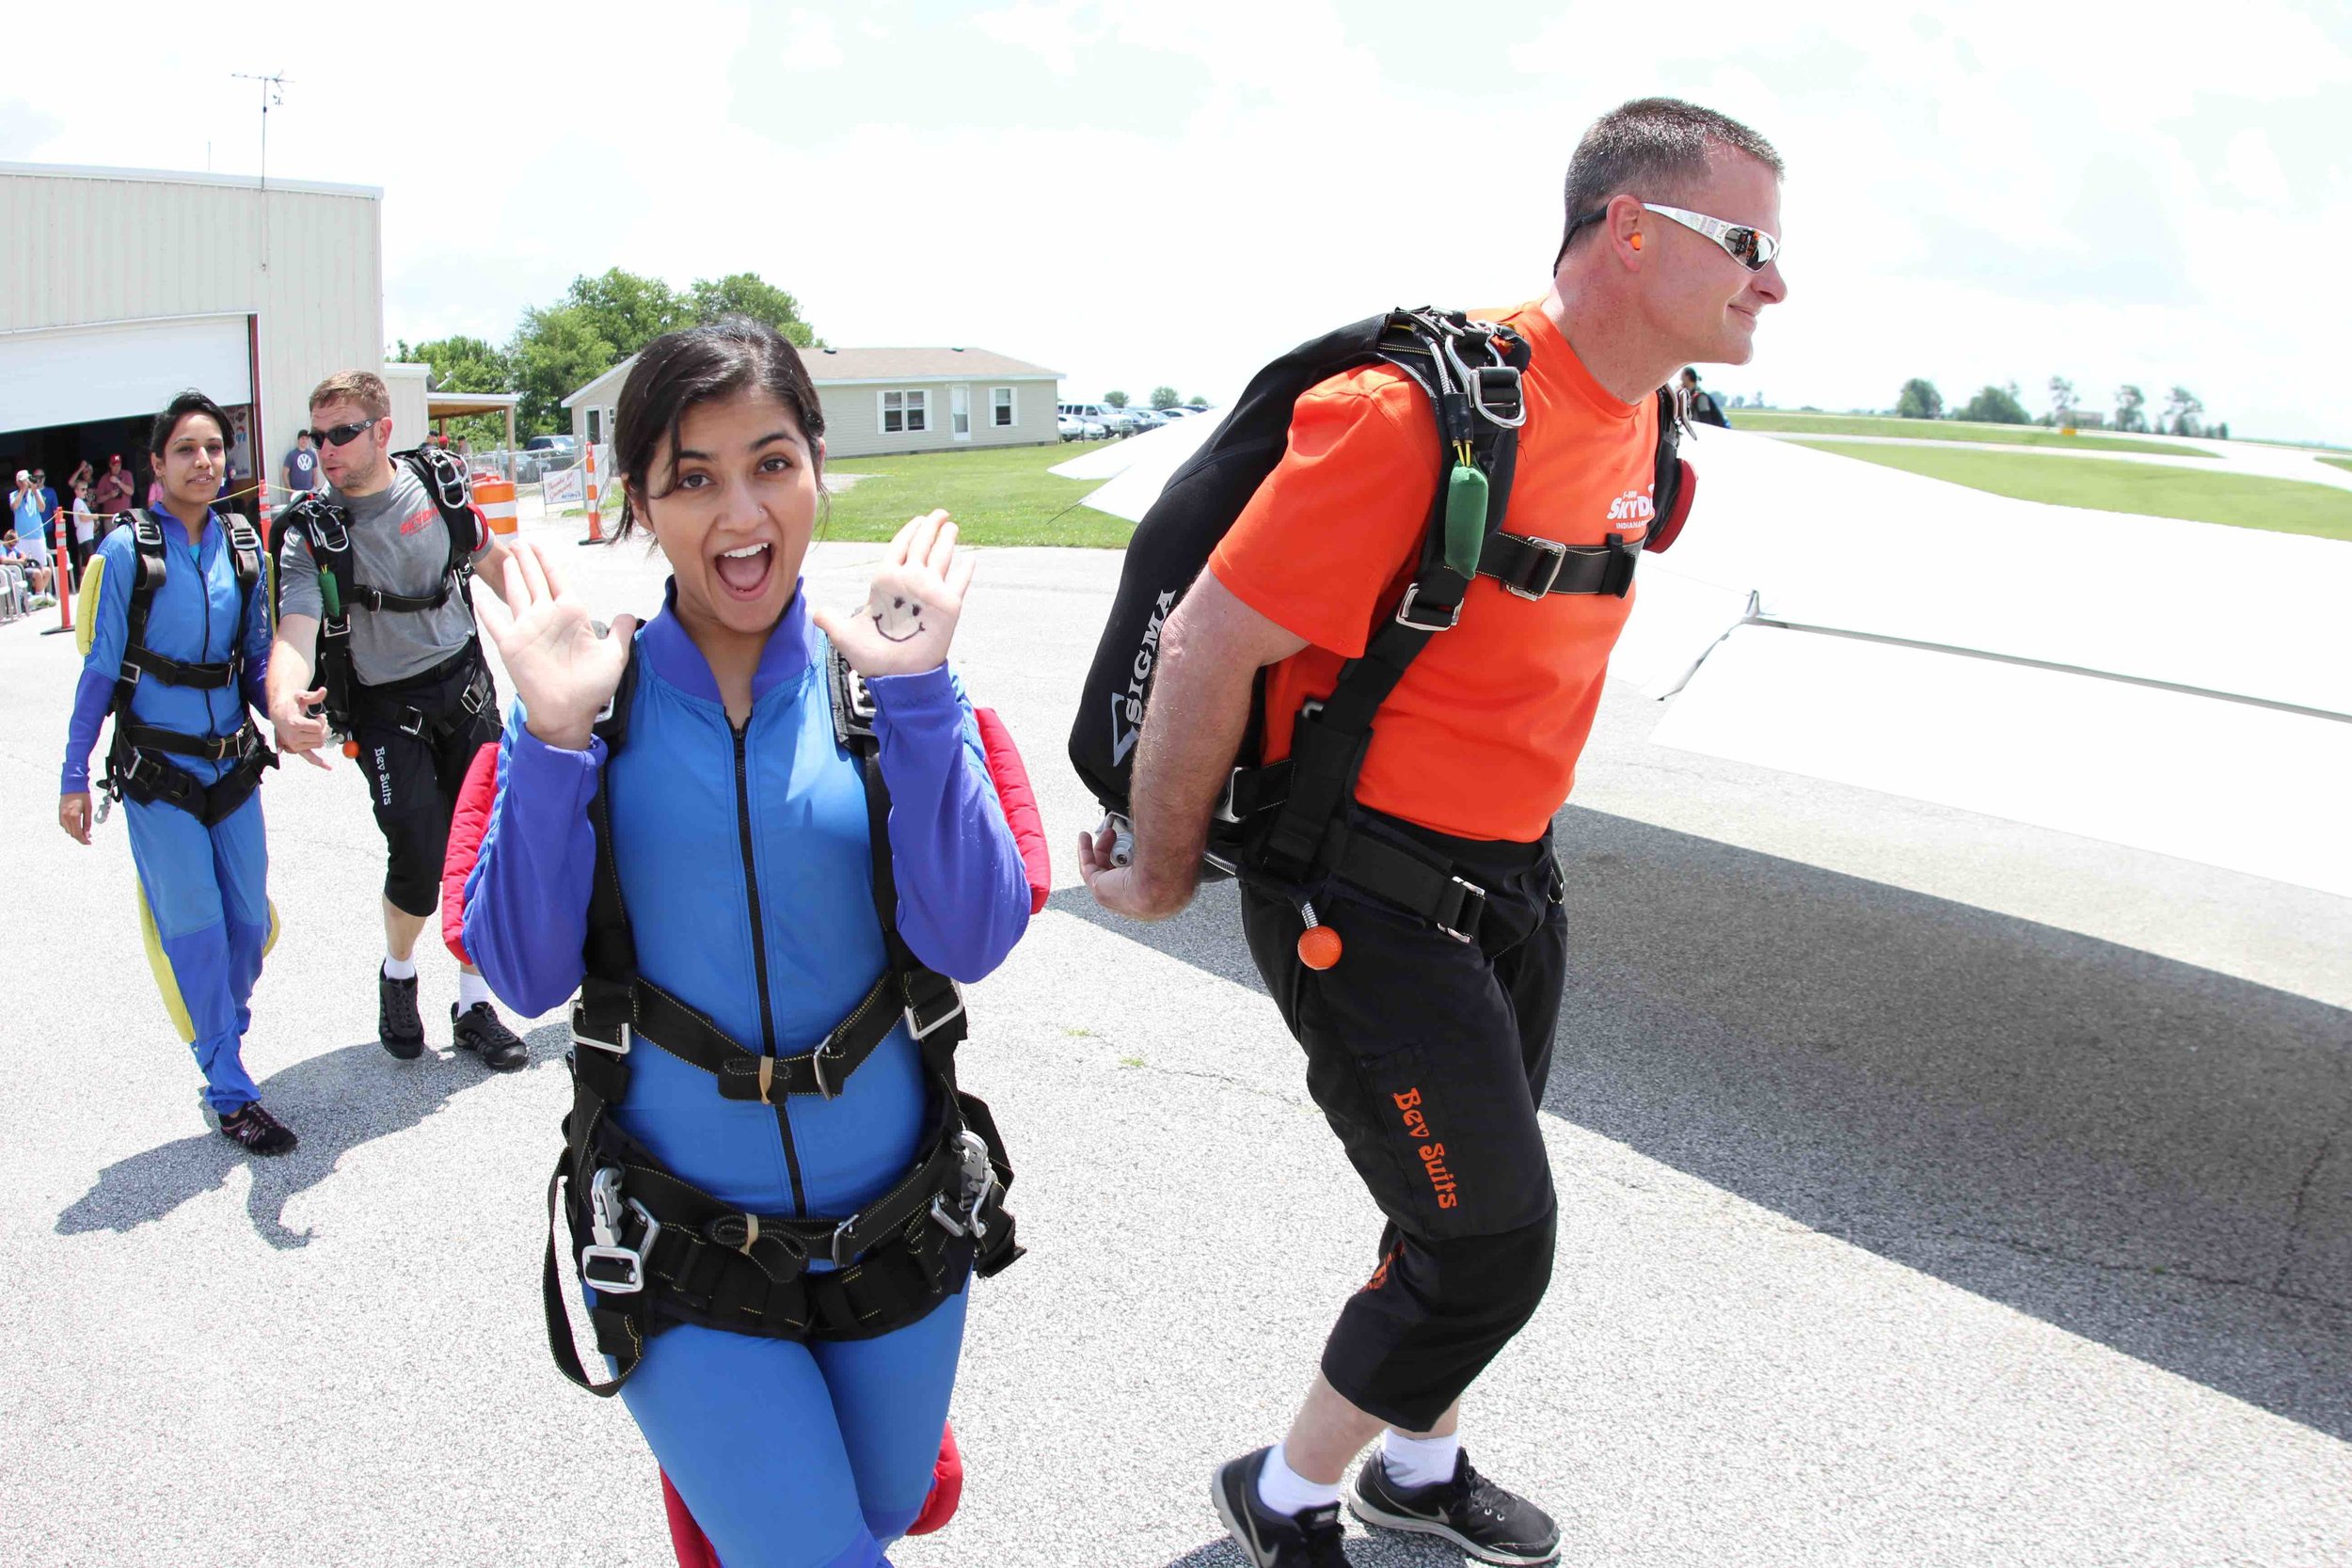 How do you feel about skydiving?